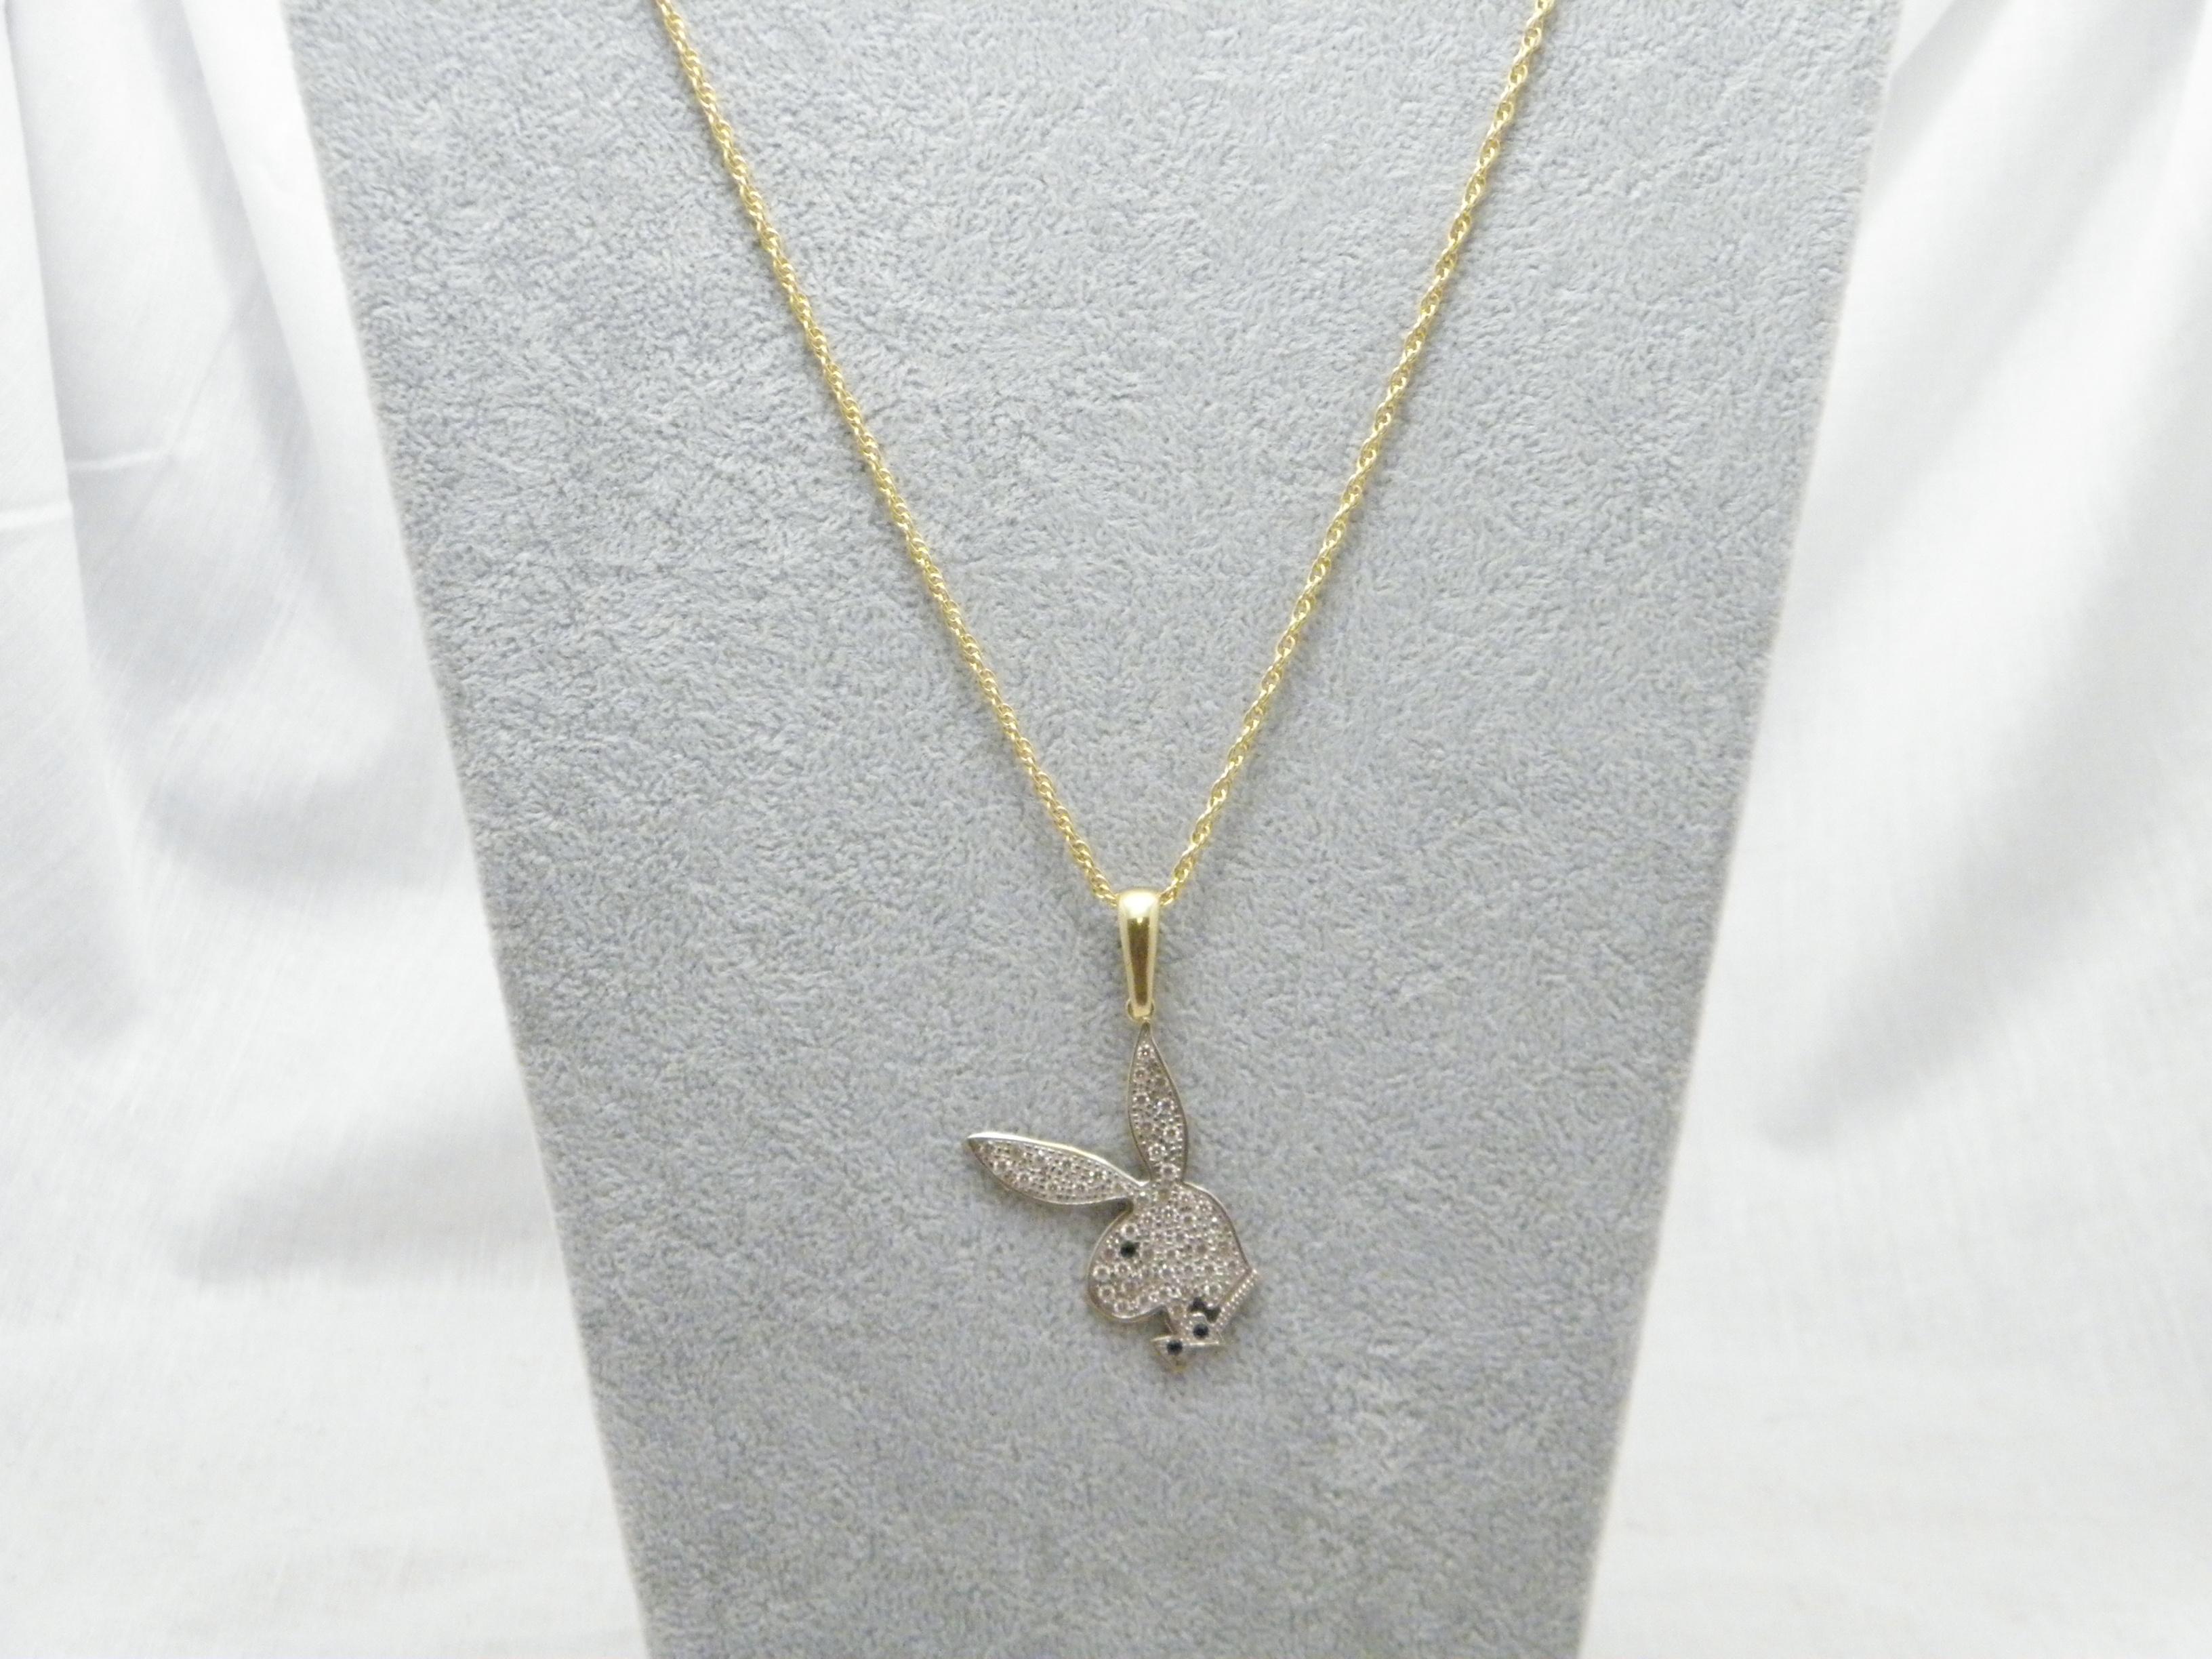 Round Cut Vintage 9ct Gold Enormous Playboy Bunny Pendant Necklace Rope Chain 375 20 Inch For Sale